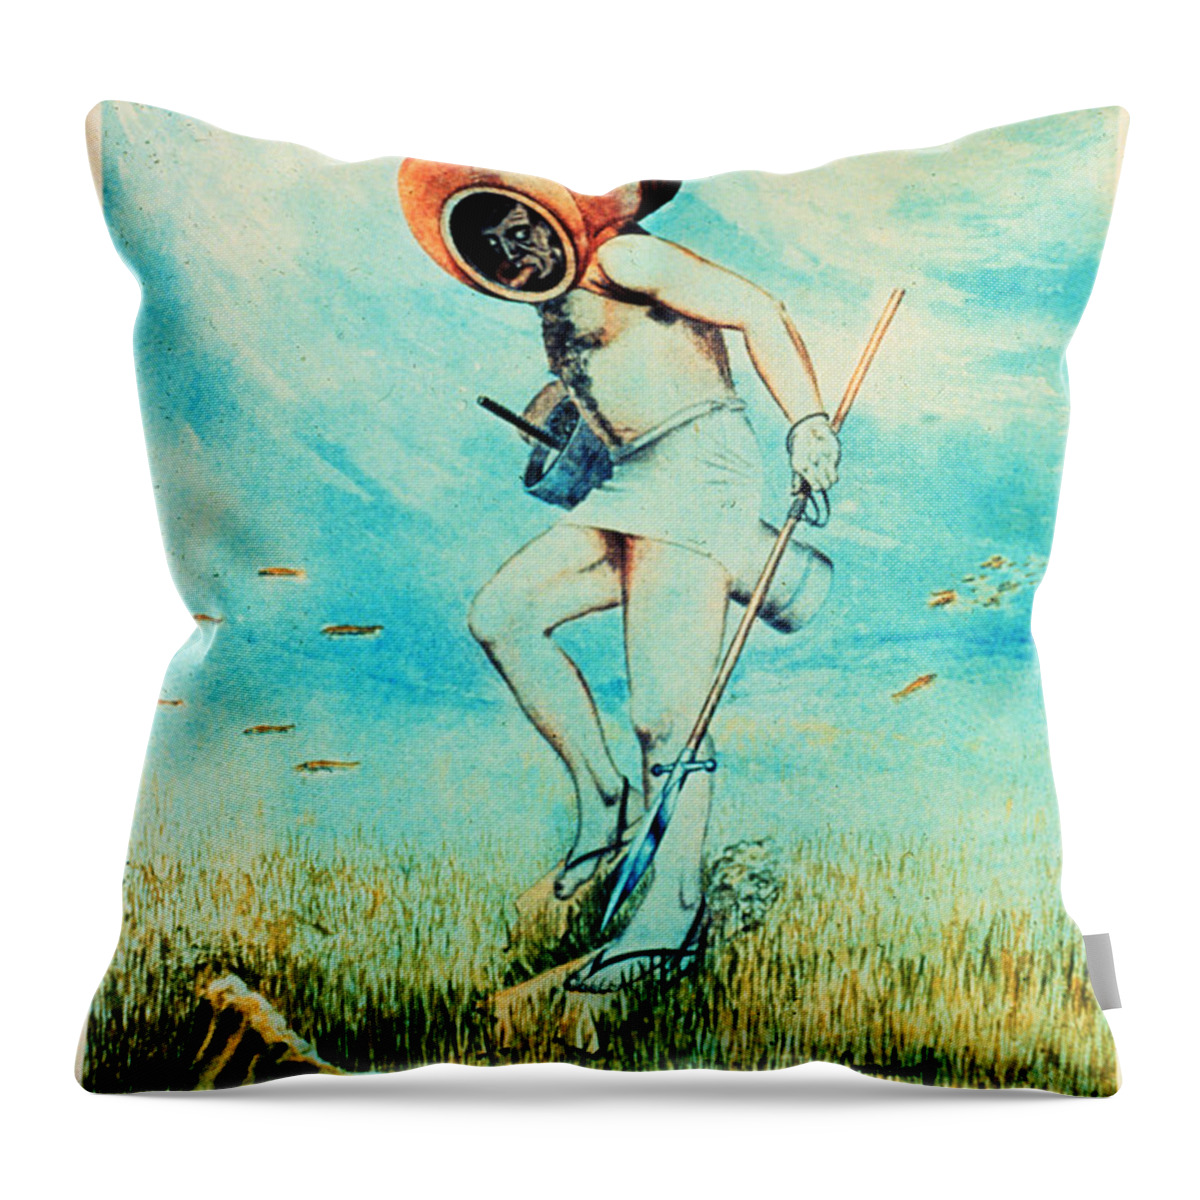 Giovanni Borelli Throw Pillow featuring the photograph Giovanni Borelli Underwater by Science Source